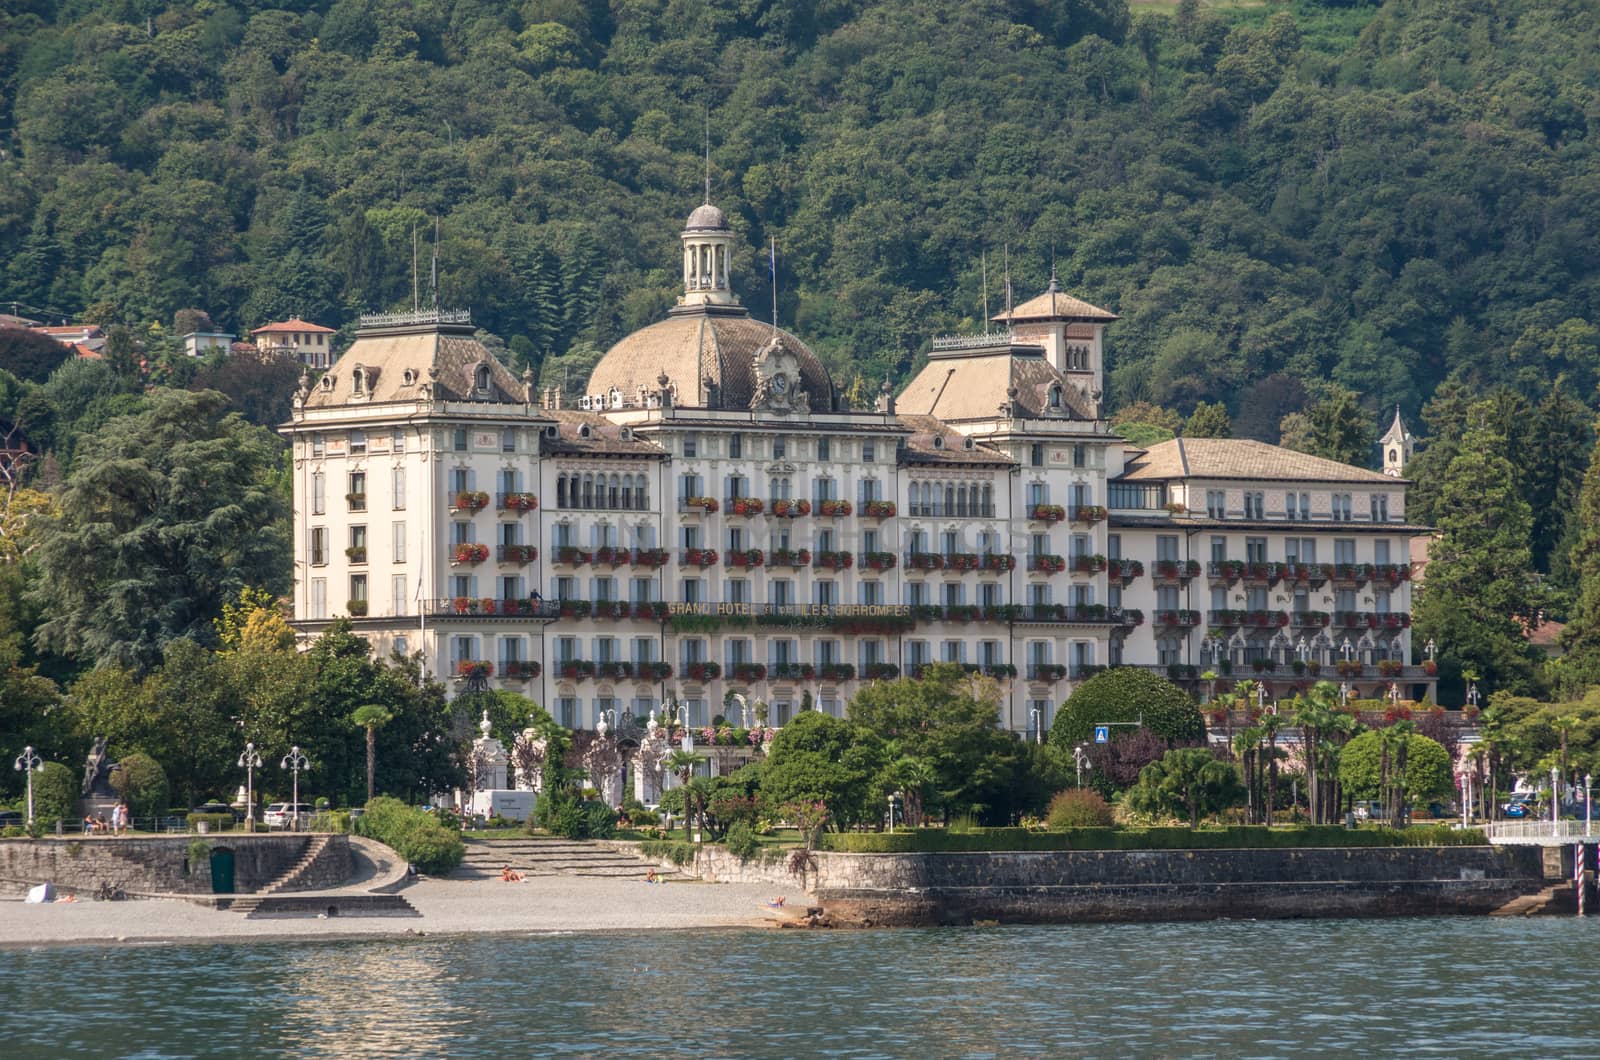 Grand Hotel Des Iles Borromees and Stresa town embankment, view  by Smoke666